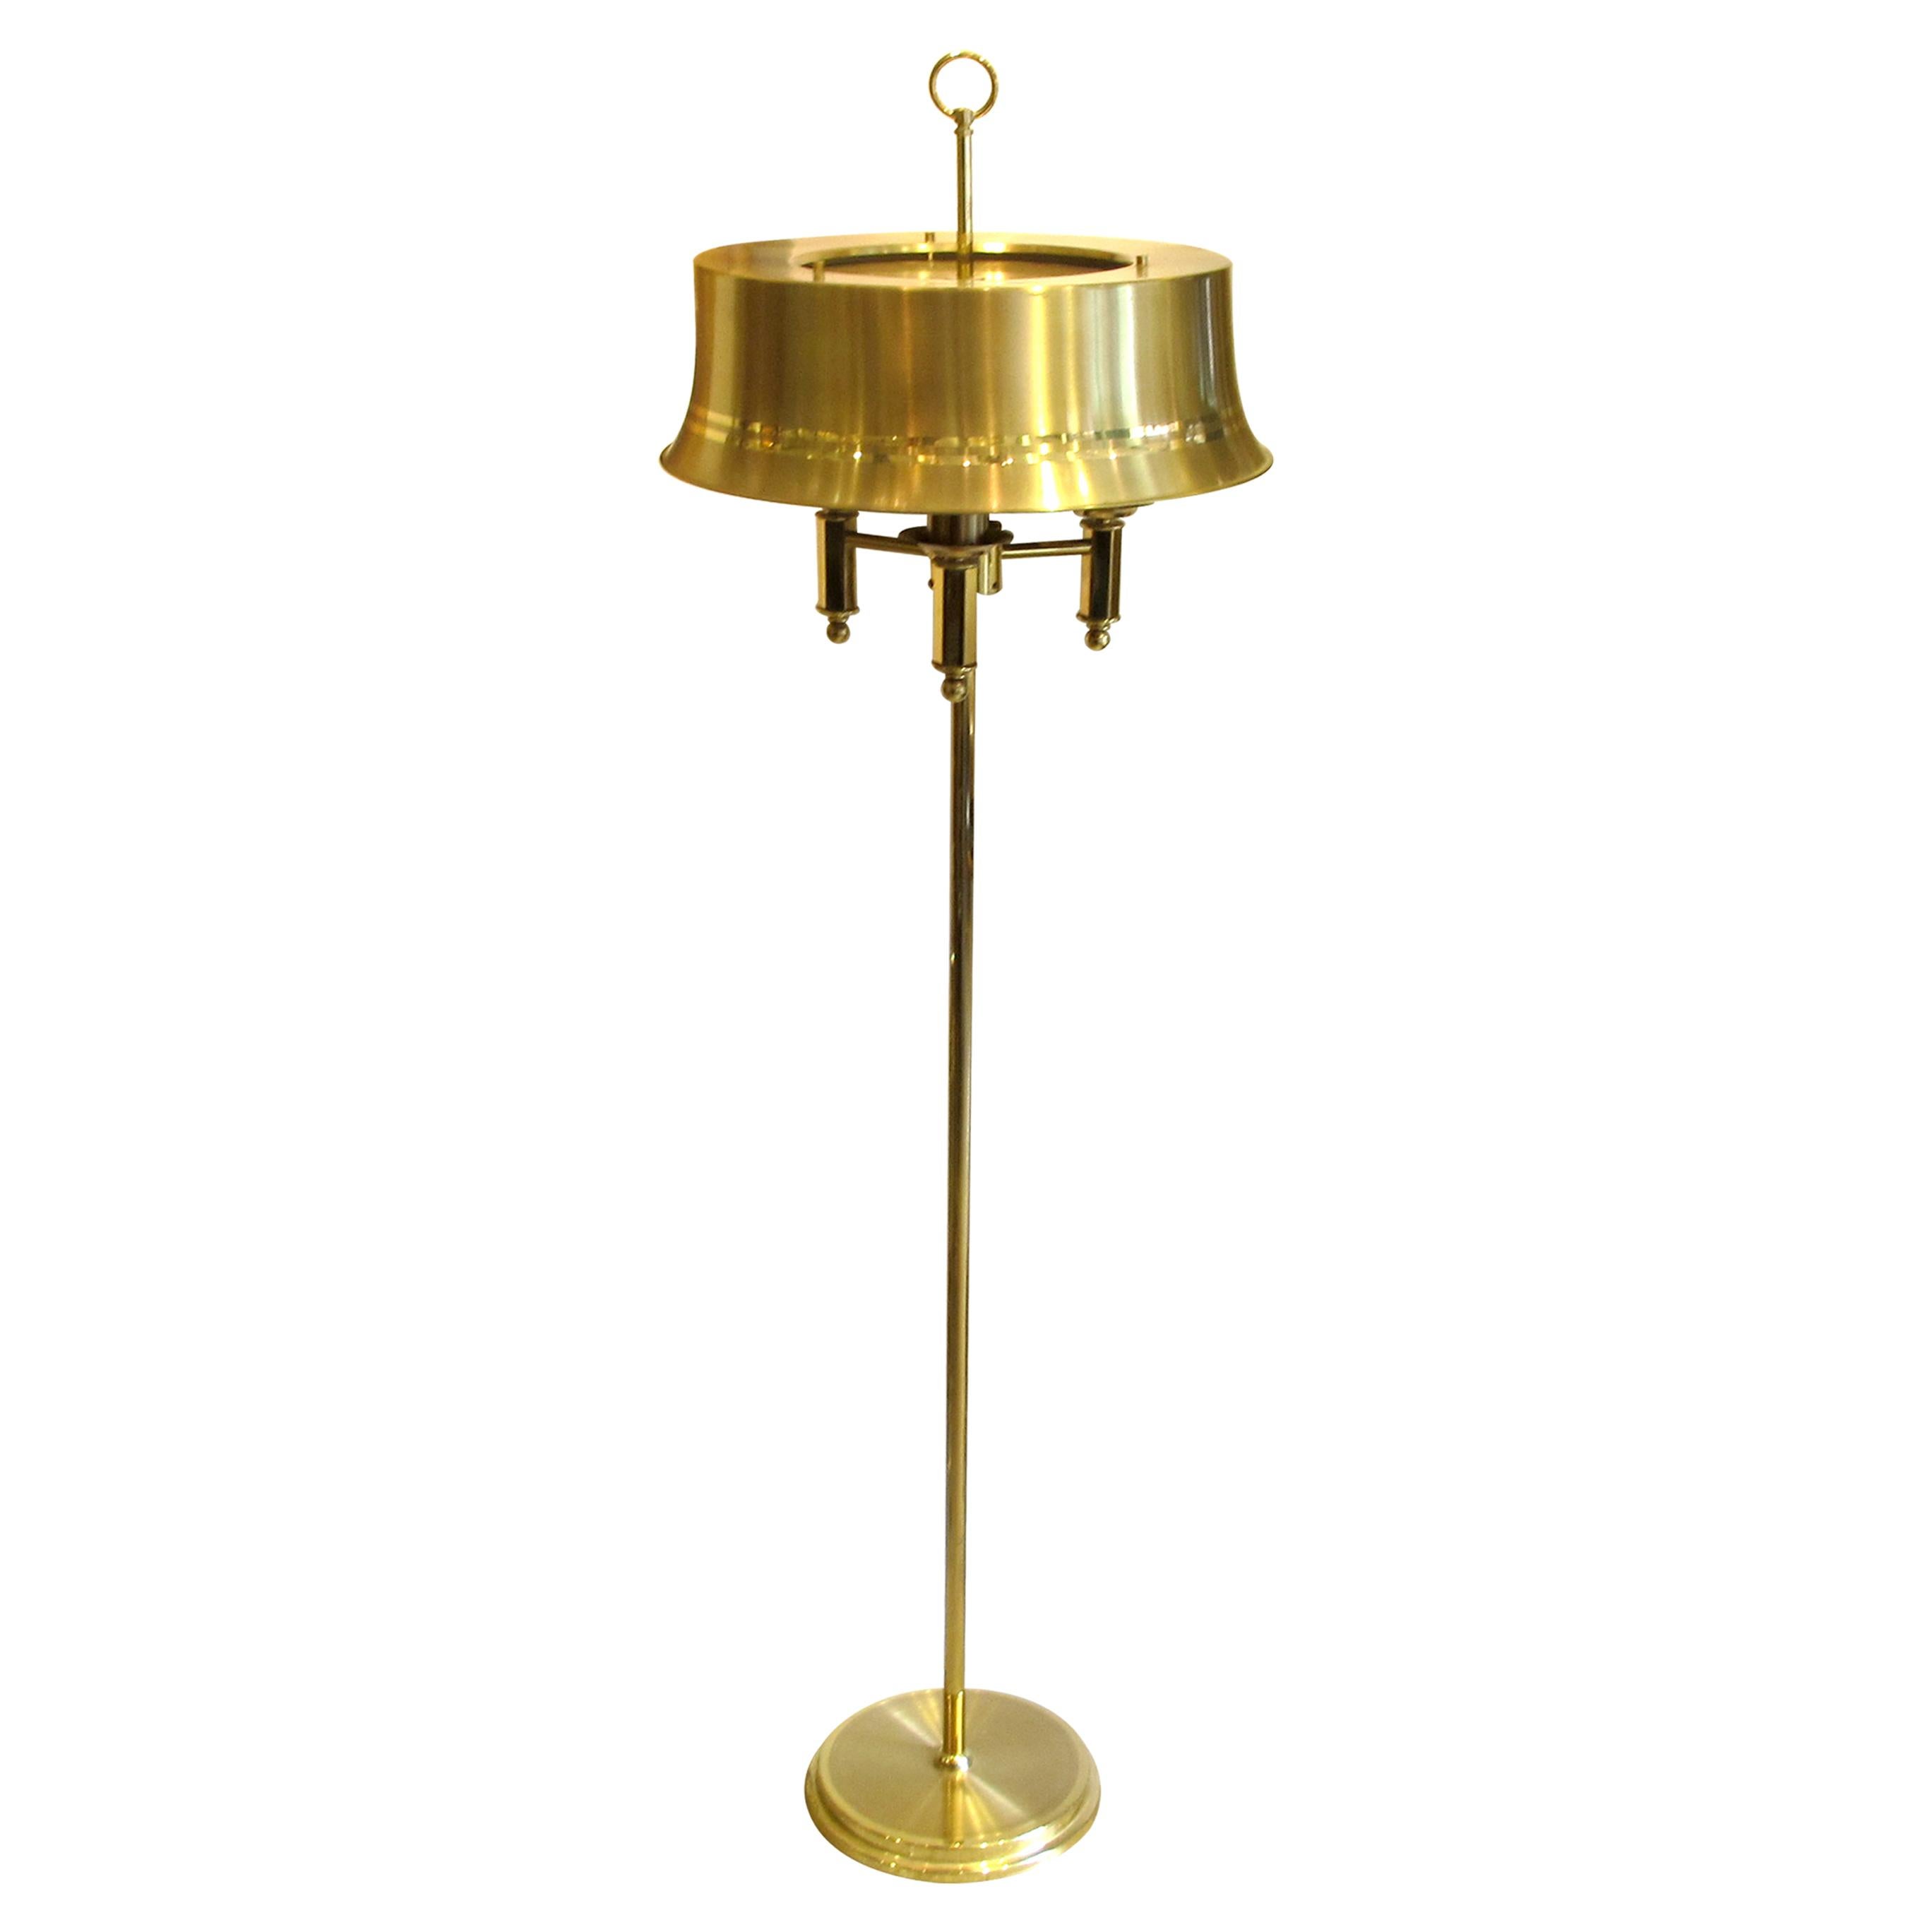 1970s Swedish, Neoclassical English style very elegant pair of brass floor lamps. Each large hat-shaped lamp boasts three light bulbs to achieve warm and beautiful lighting. The floor lamps are in great condition with minor wear on the shades and